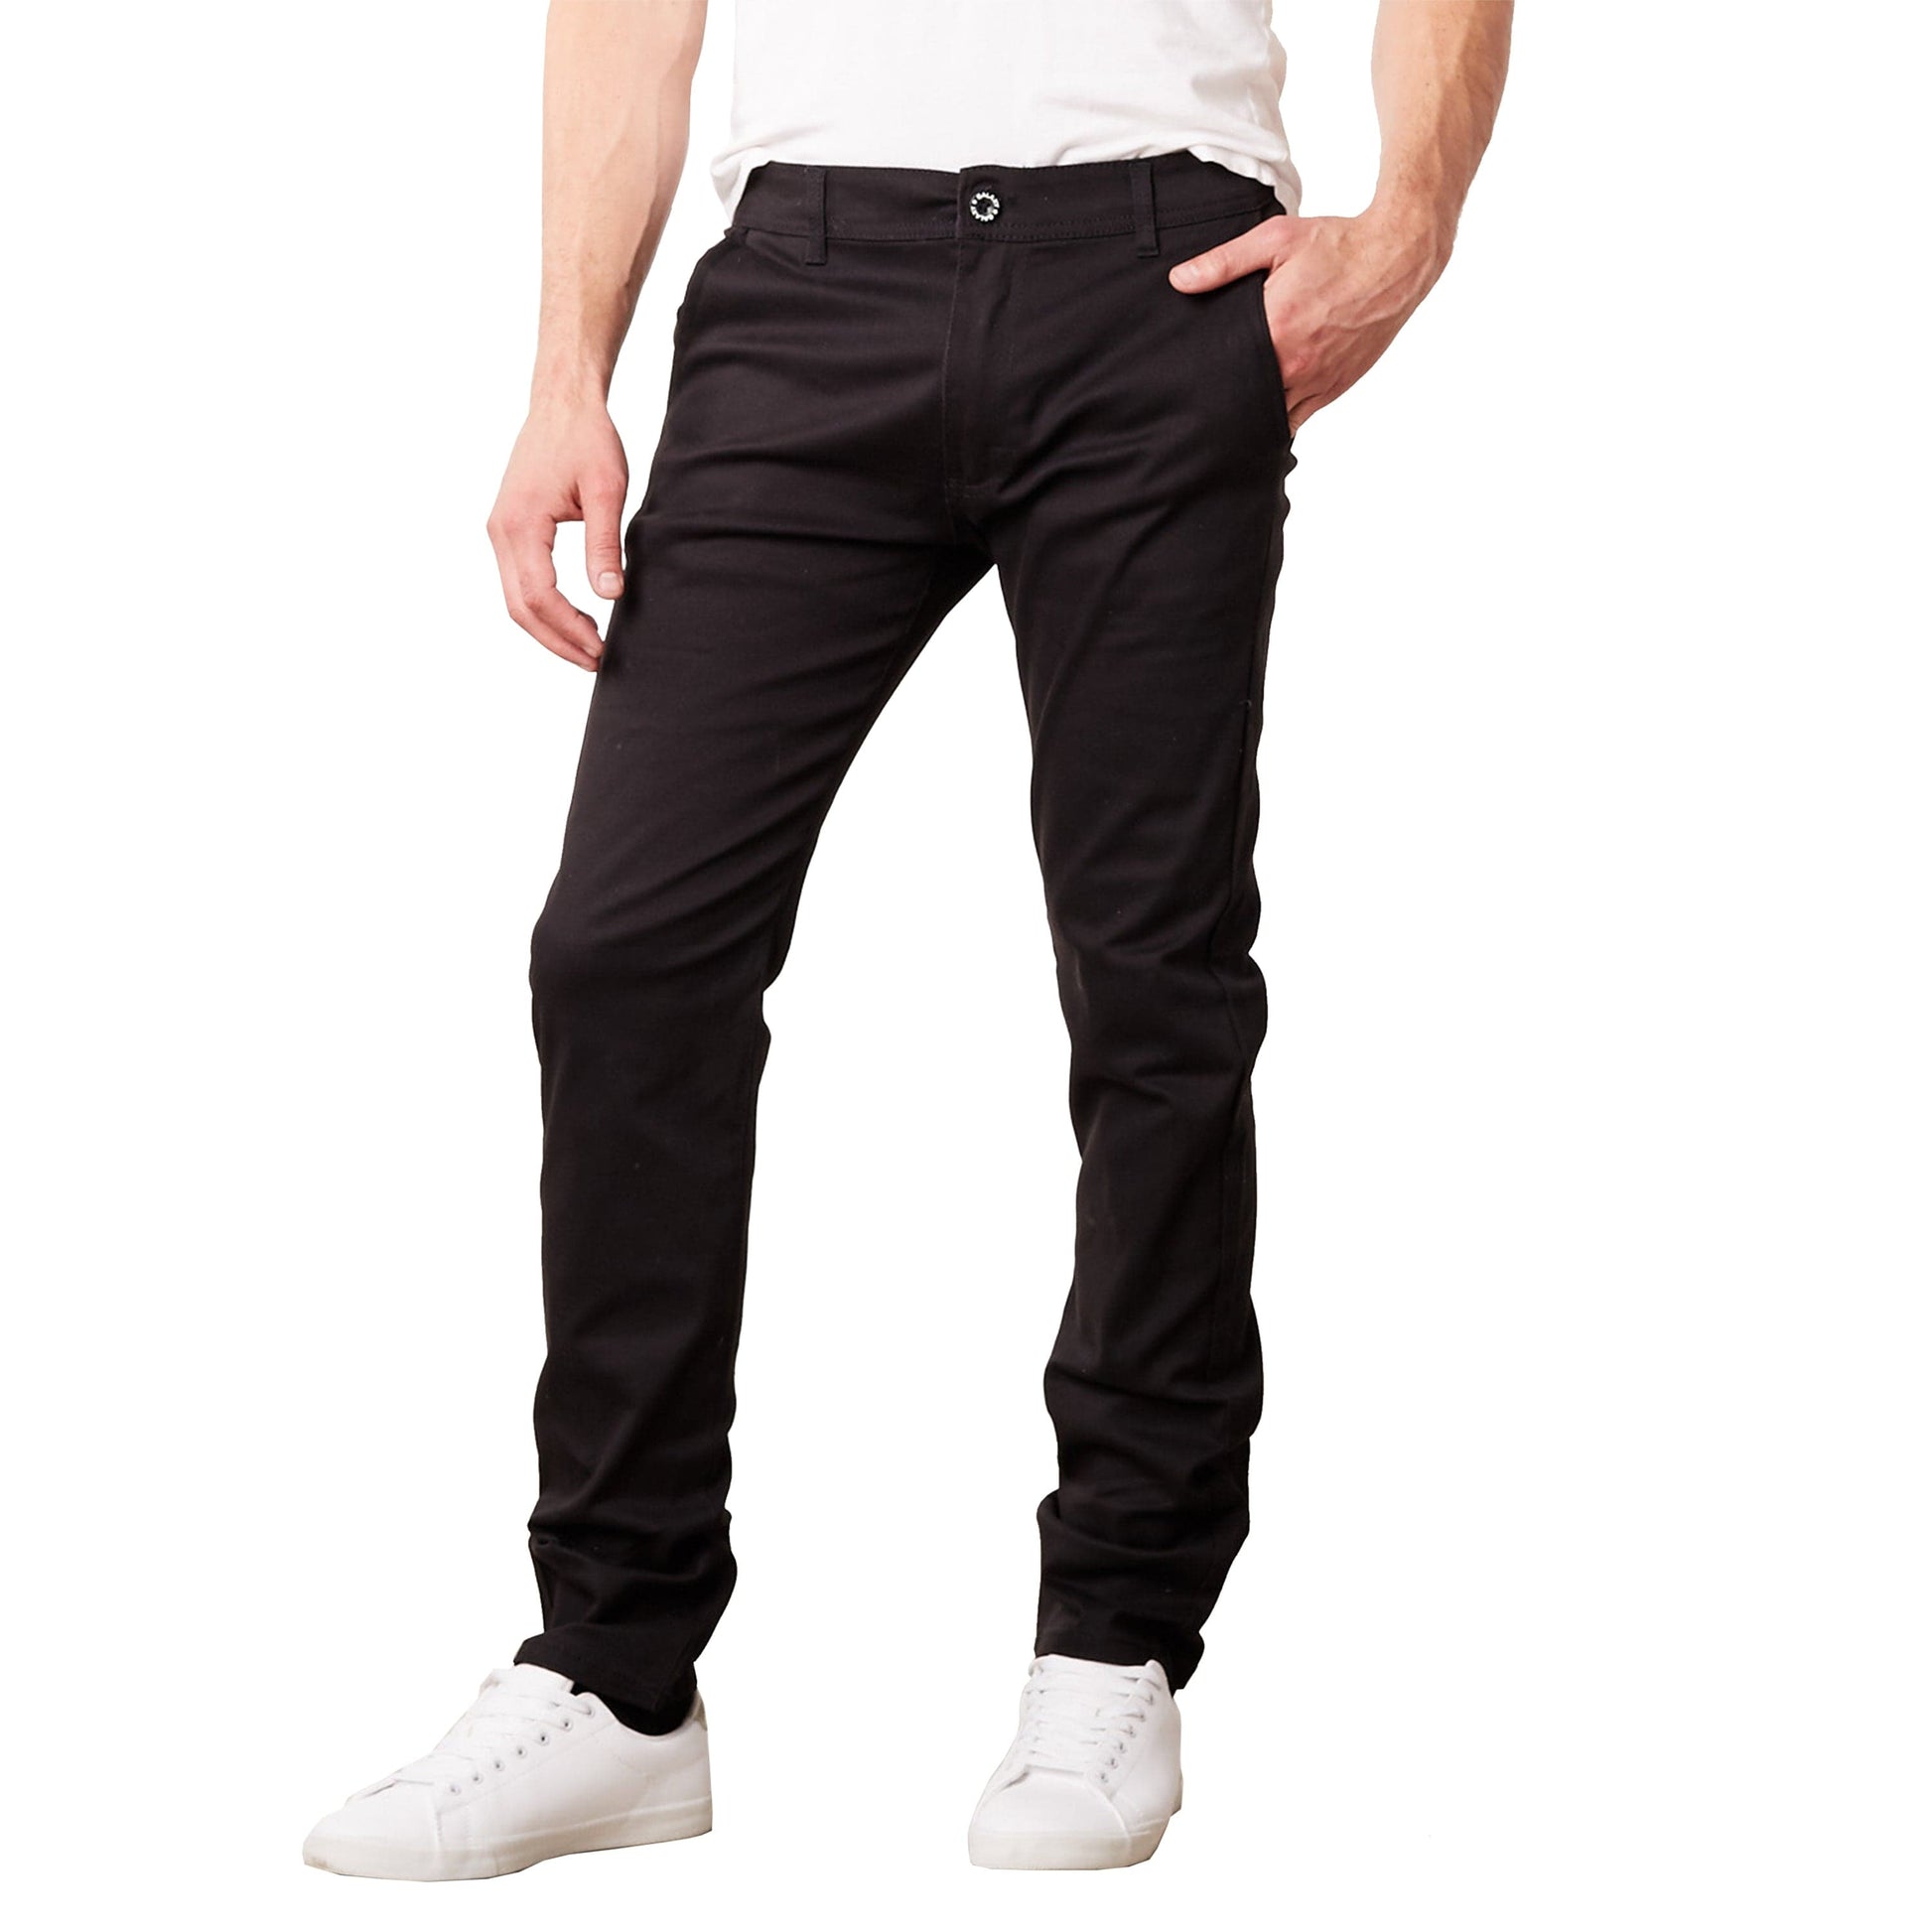 Men's Flex Stretch Slim Fit Cotton Everyday Chino Pants (31 Inseam) –  GalaxybyHarvic